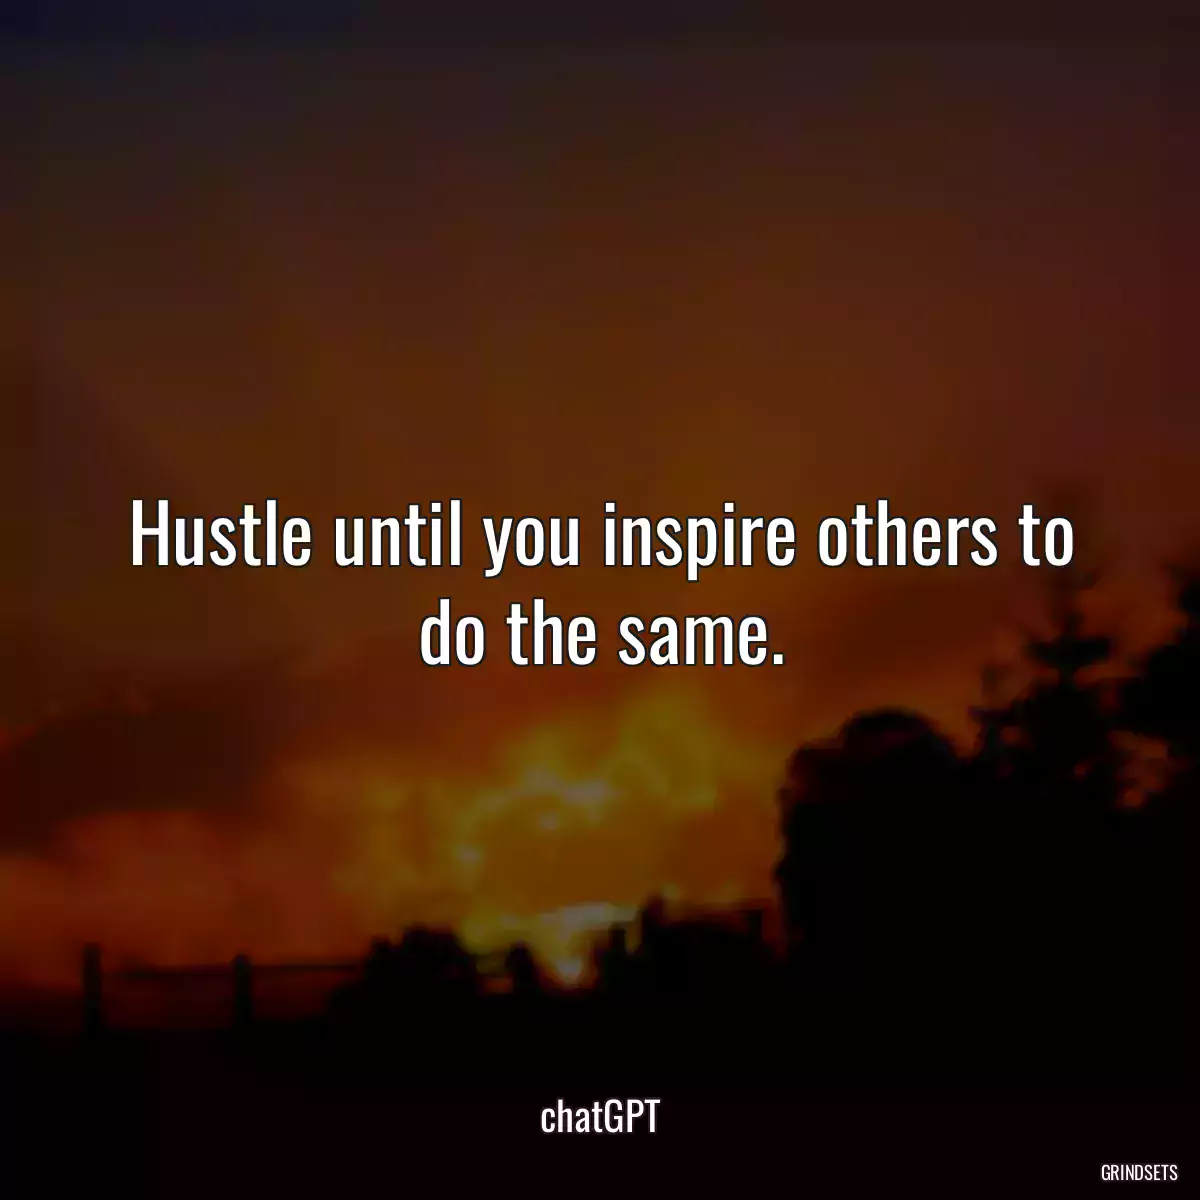 Hustle until you inspire others to do the same.